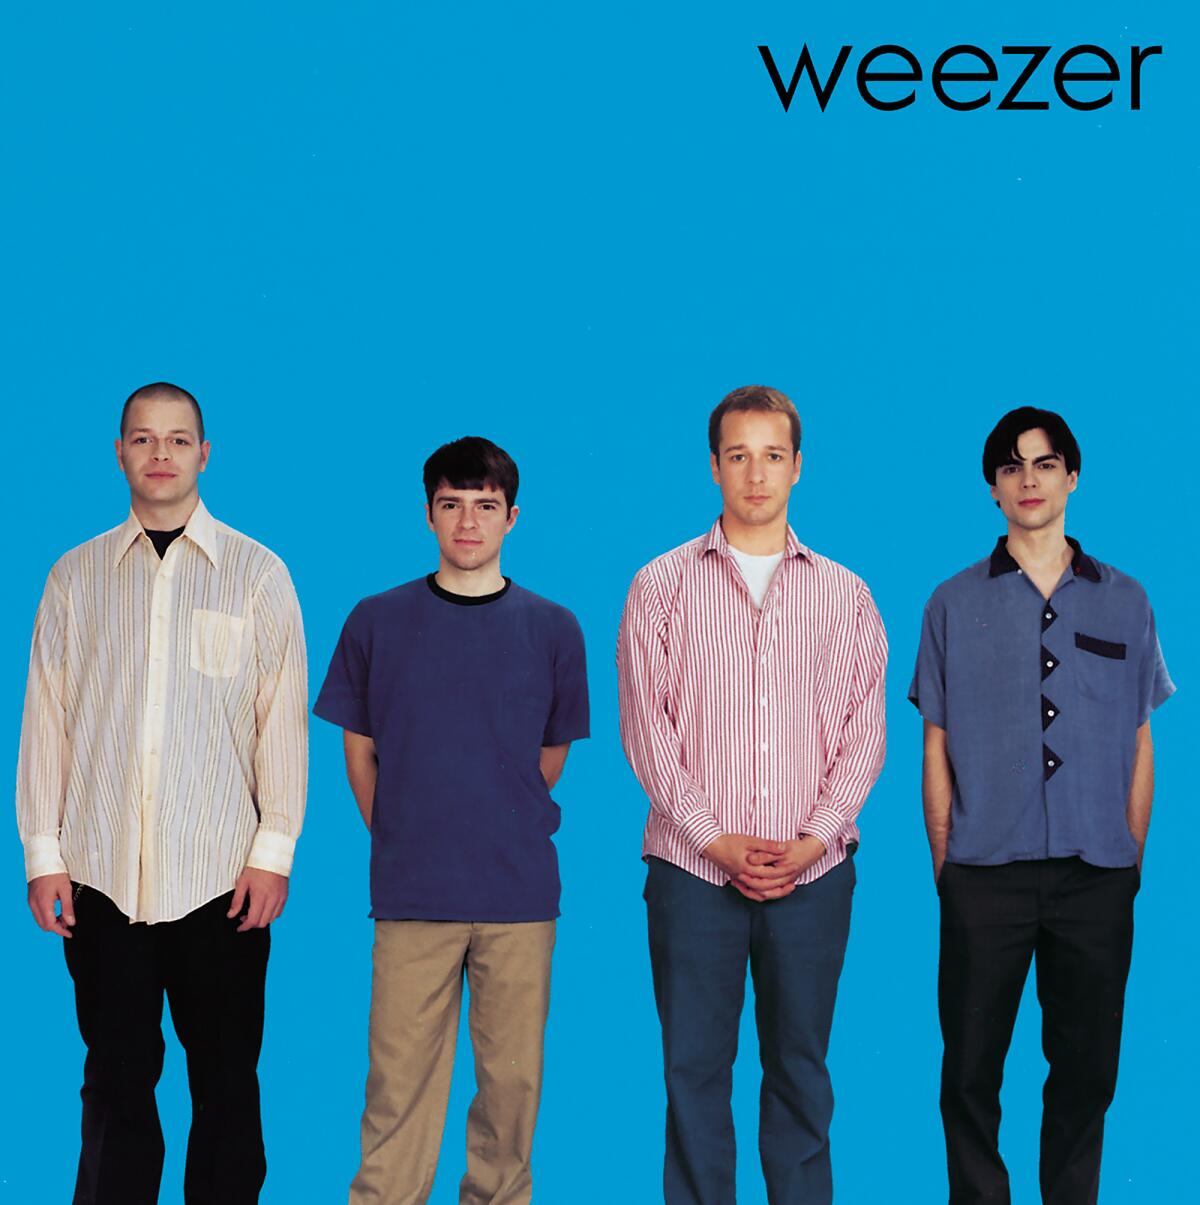 The cover of Weezer's Blue Album.